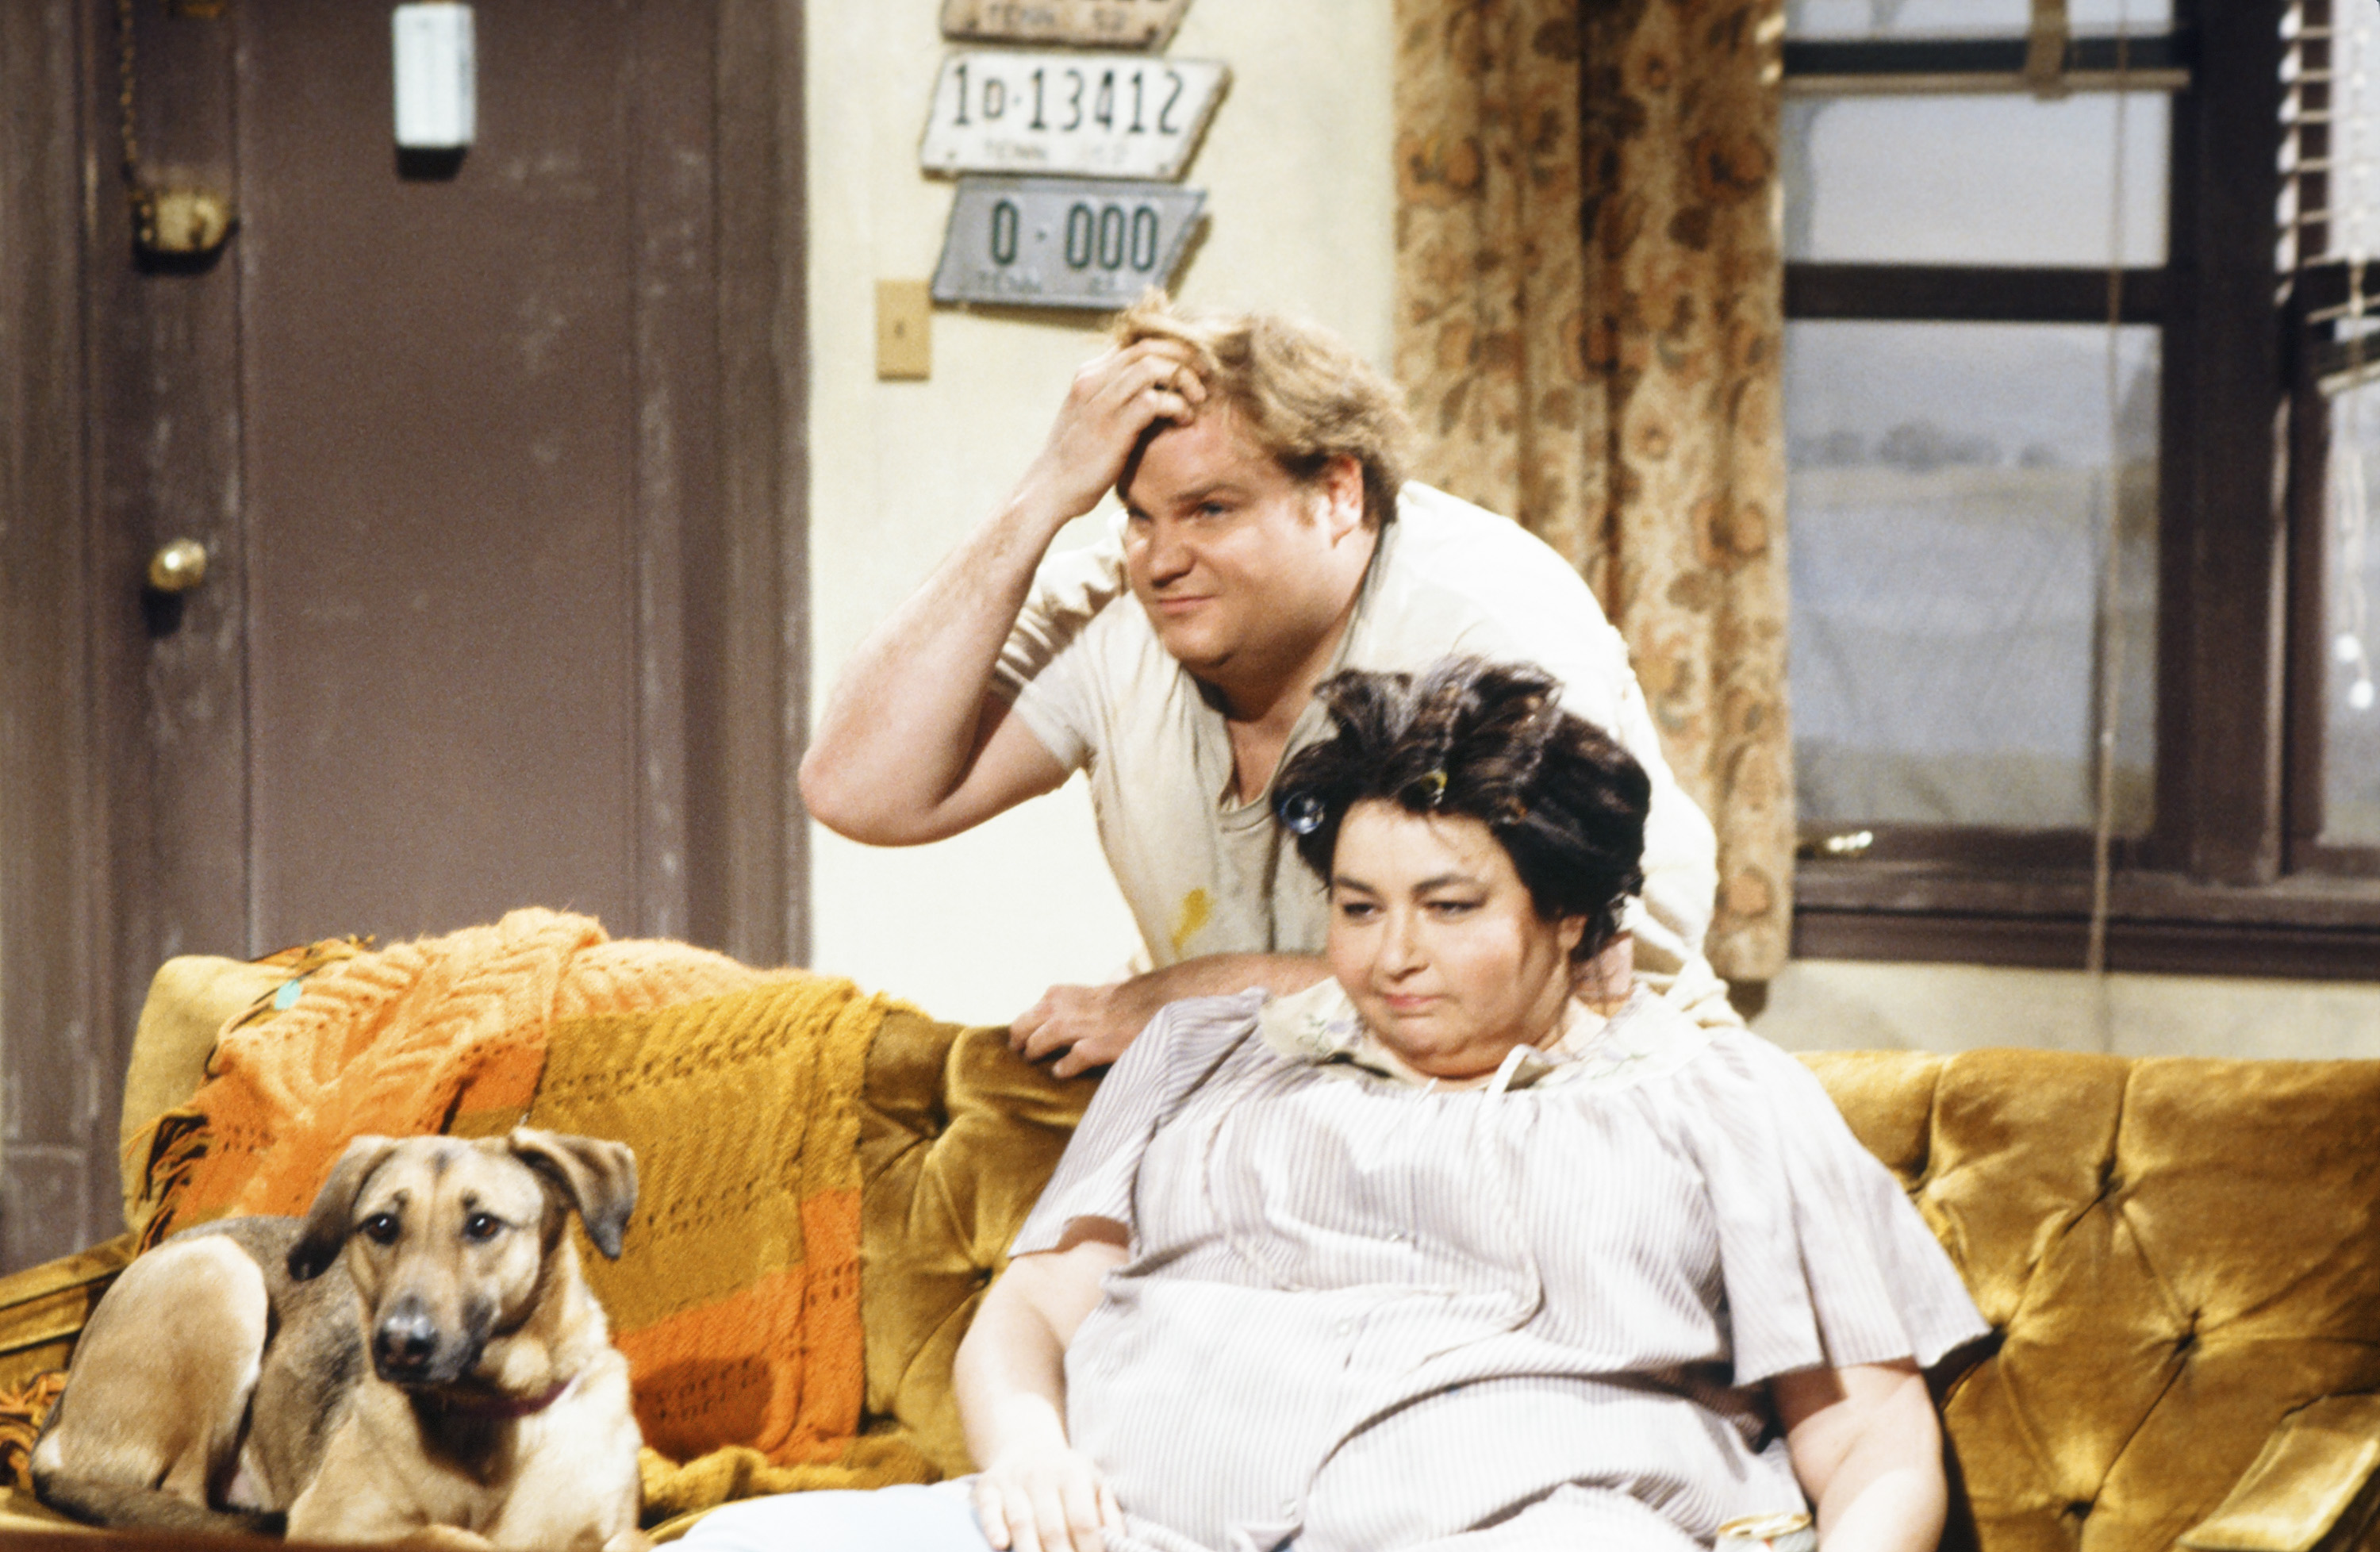 Chris Farley and Roseanne Barr in a skit called "White Trash History Minute" on February 16, 1991. | Source: Getty Images